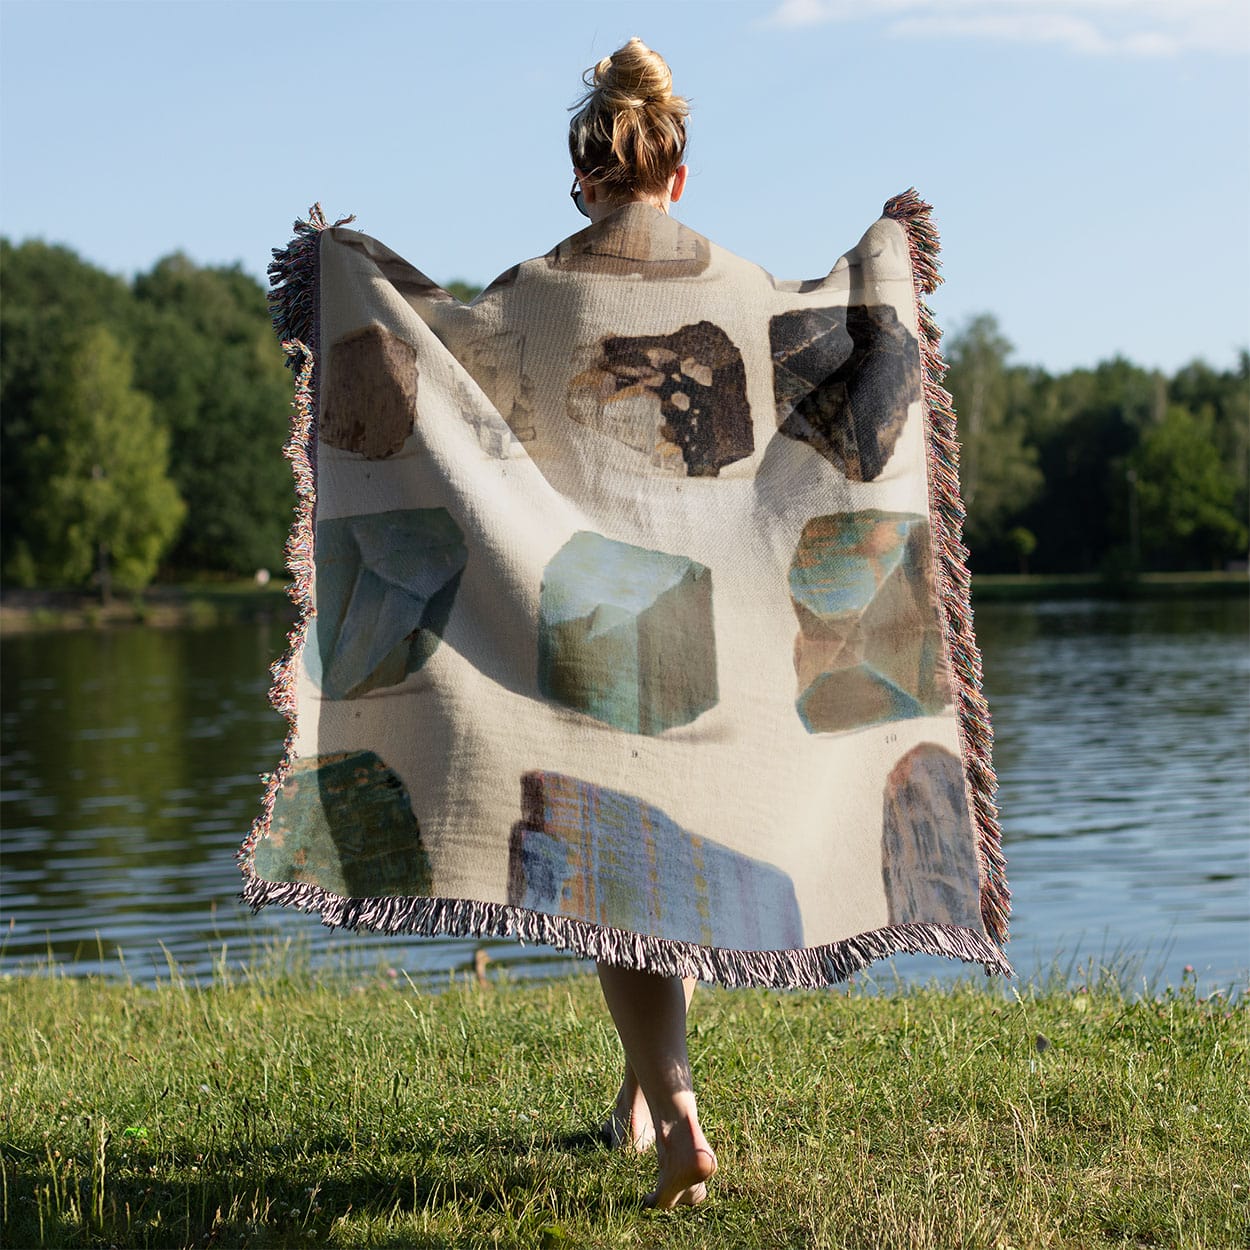 Raw Crystals and Gemstones Woven Blanket Held on a Woman's Back Outside